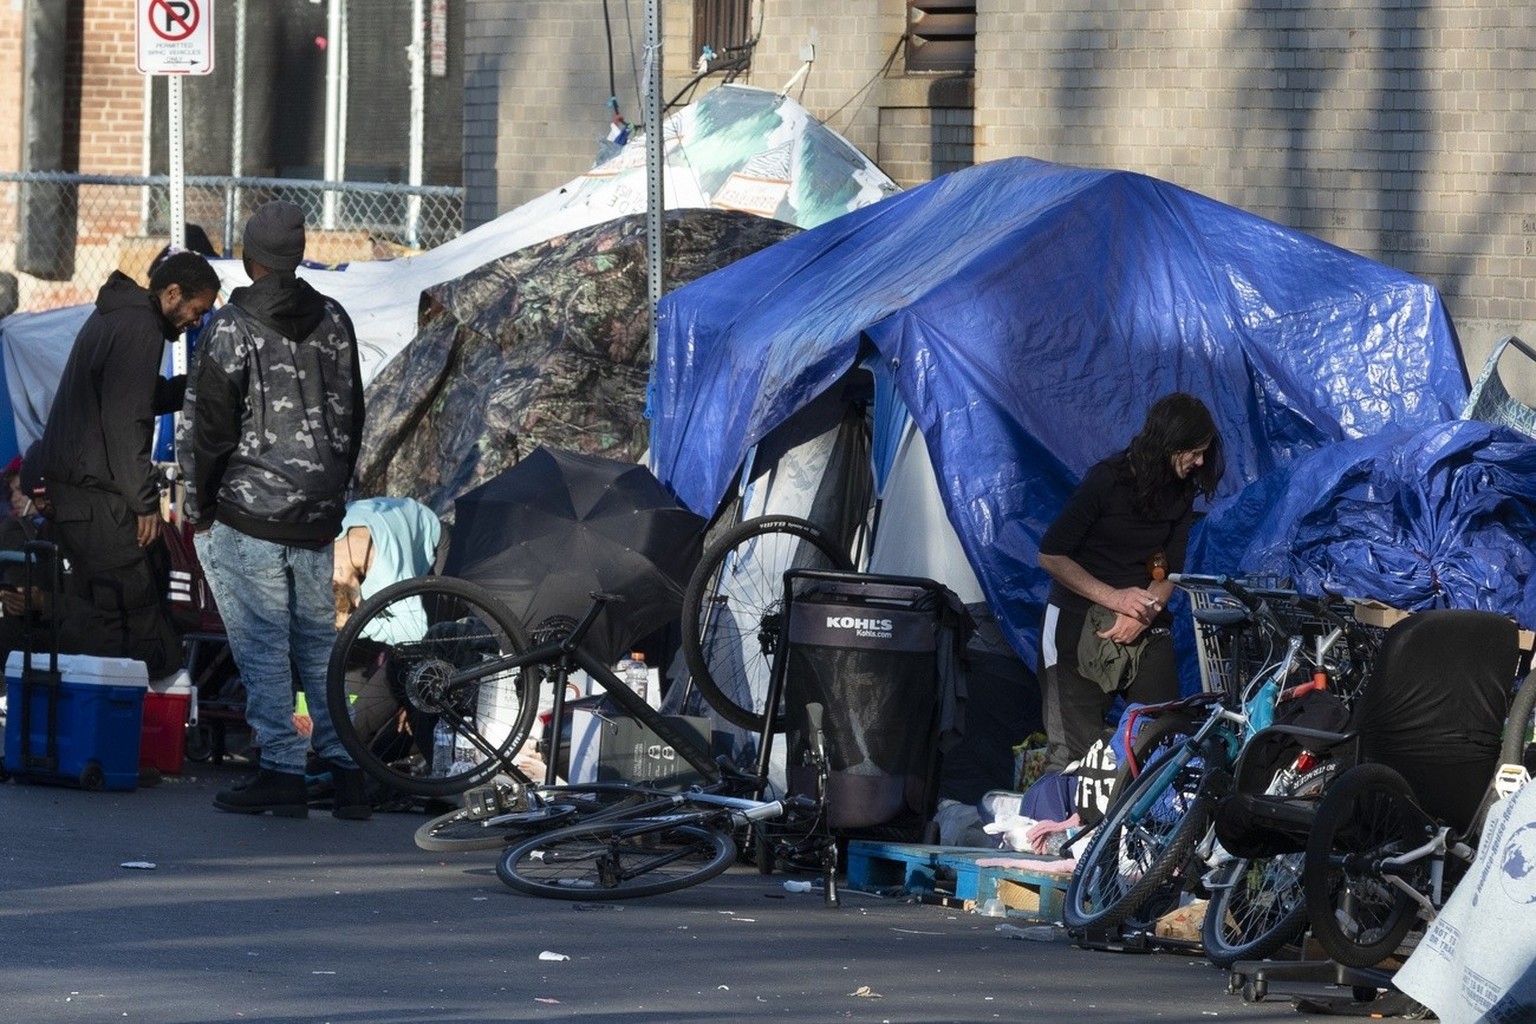 The tents of a homeless camp line the sidewalk in area commonly known as Mass and Cass, Saturday, Oct. 23, 2021, in Boston. Boston declared addiction and homelessness a public health emergency on Tues ...